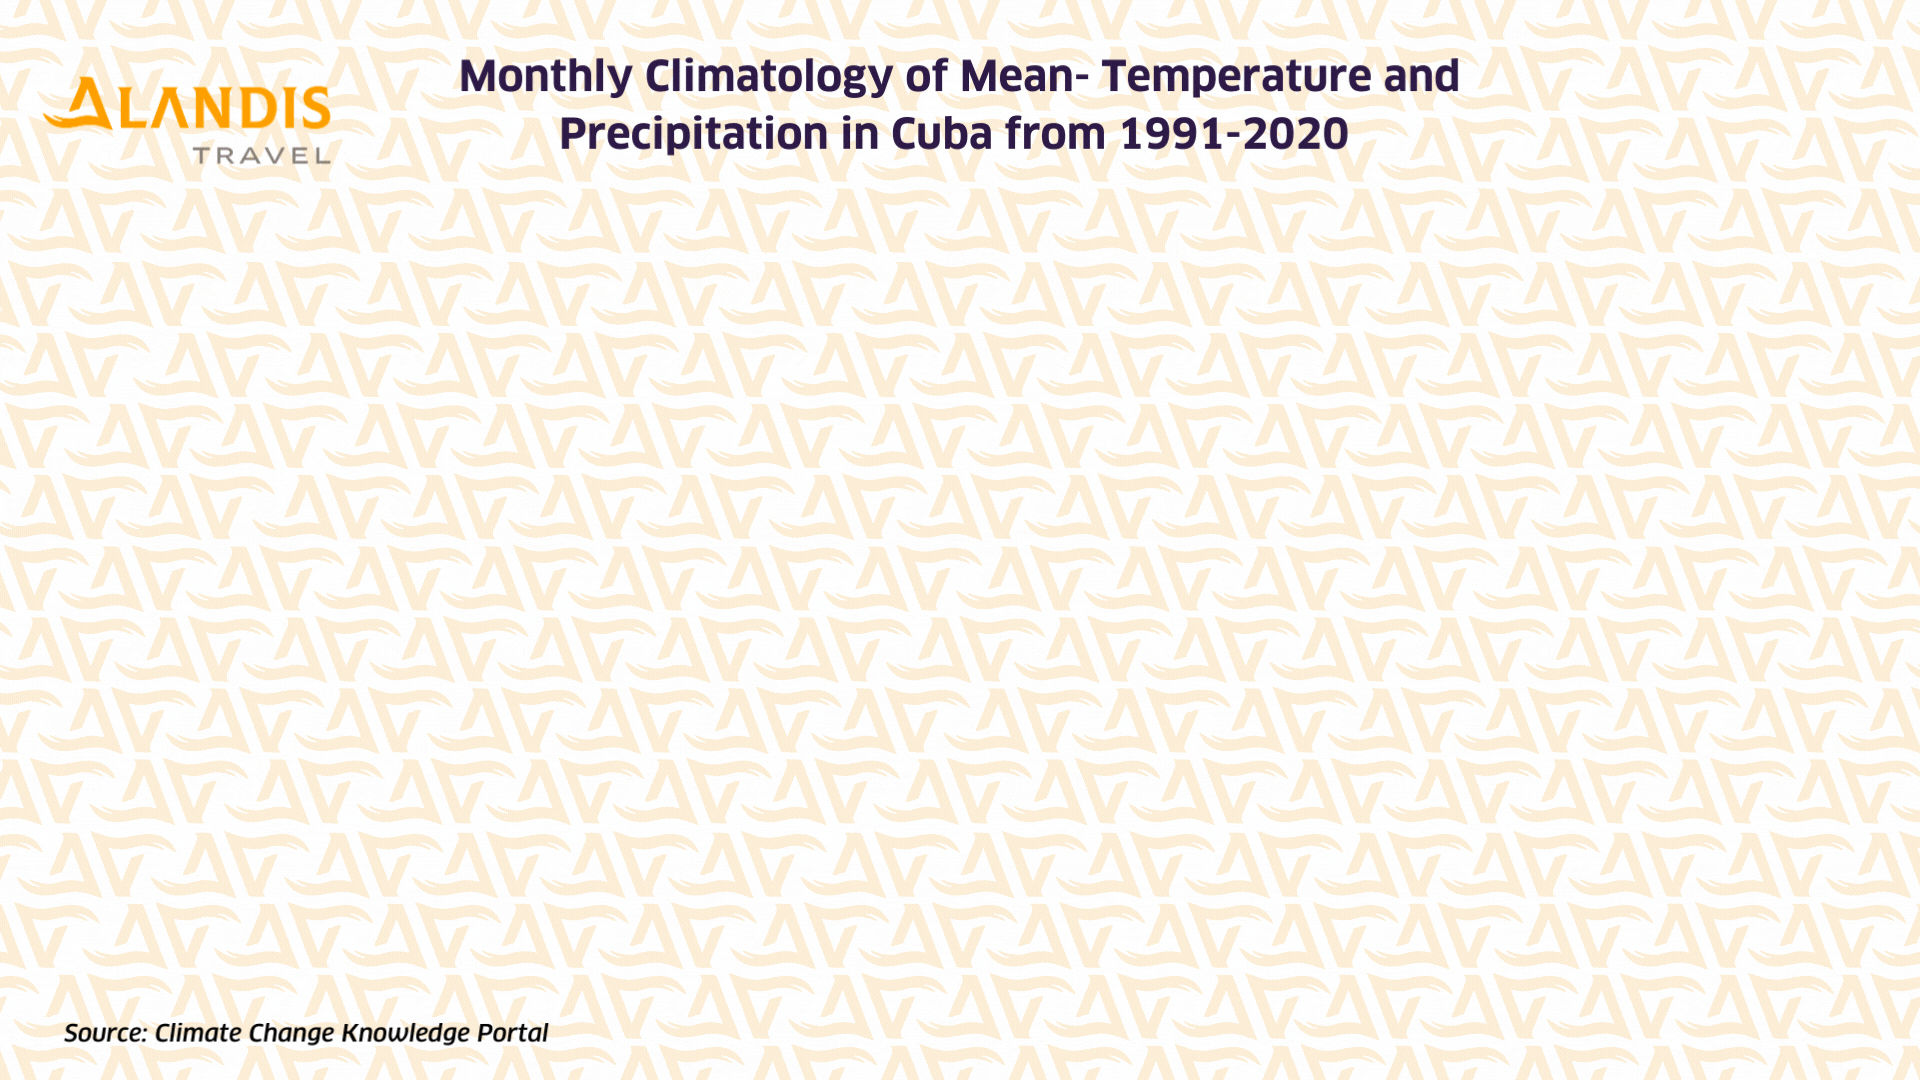 Monthly climatology of mean temperature and precipitation in Cuba from 1991-2020